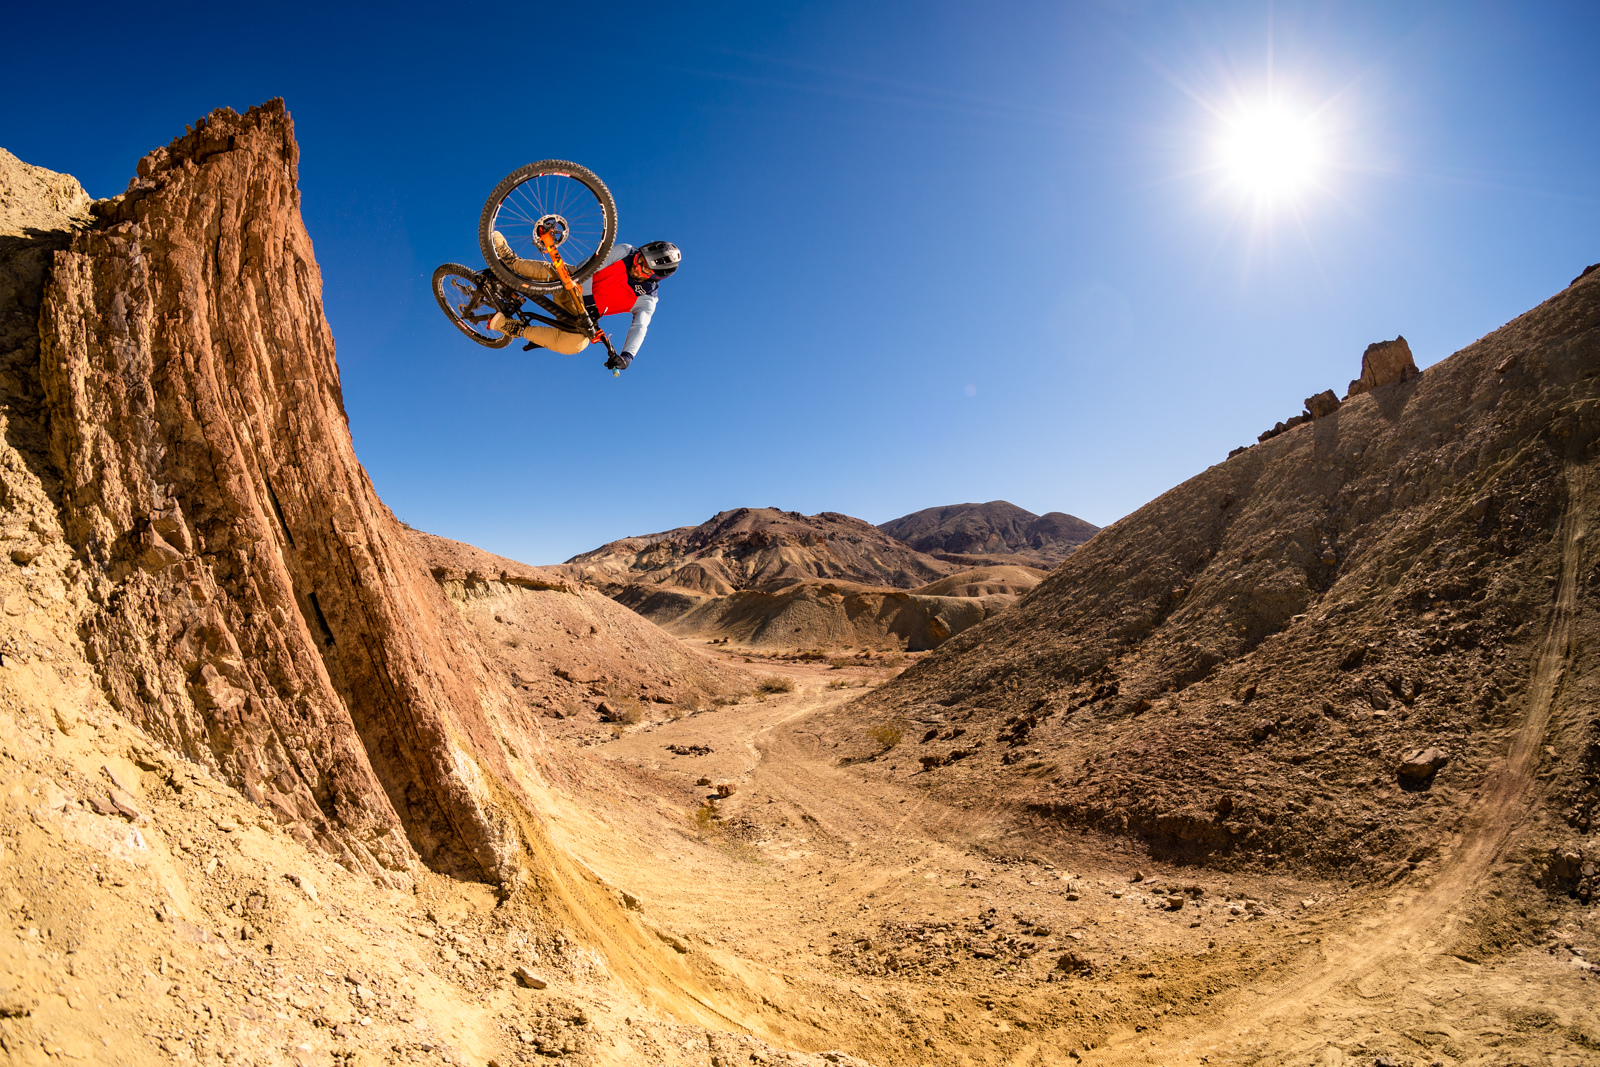 Kirt Voreis launches a lofty table in the California desert on his mountain bike.